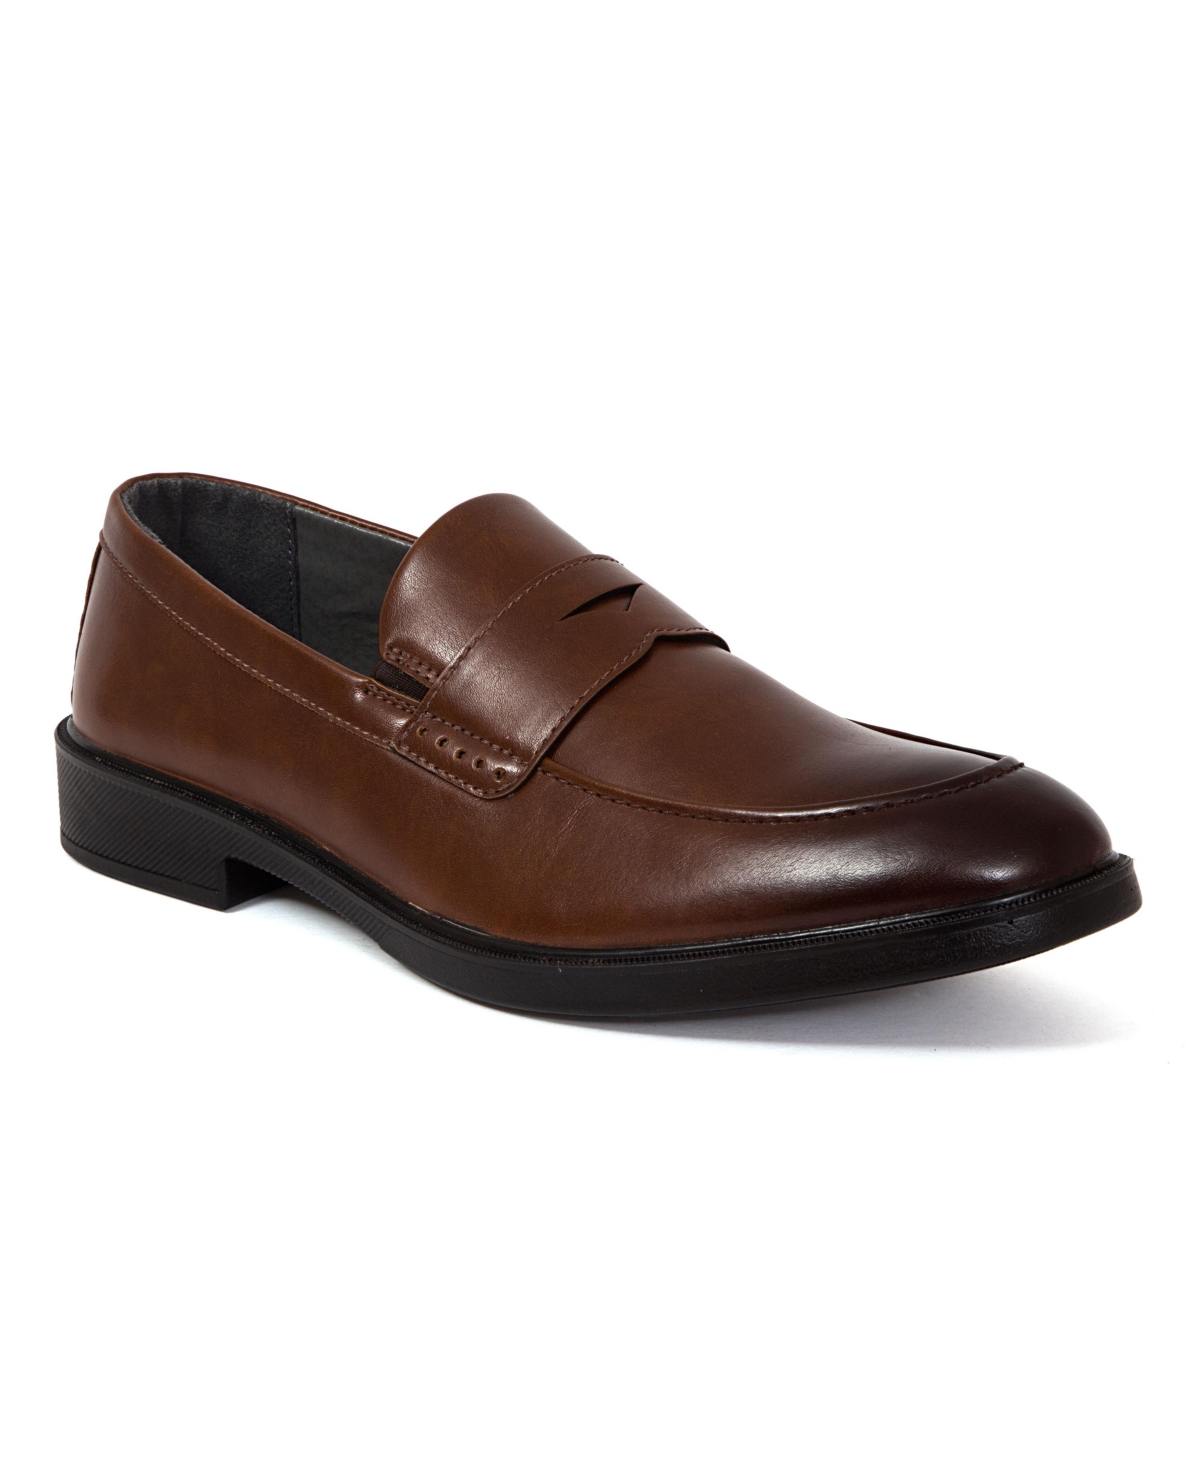 Men's Civic Comfort Penny Loafers - Brown